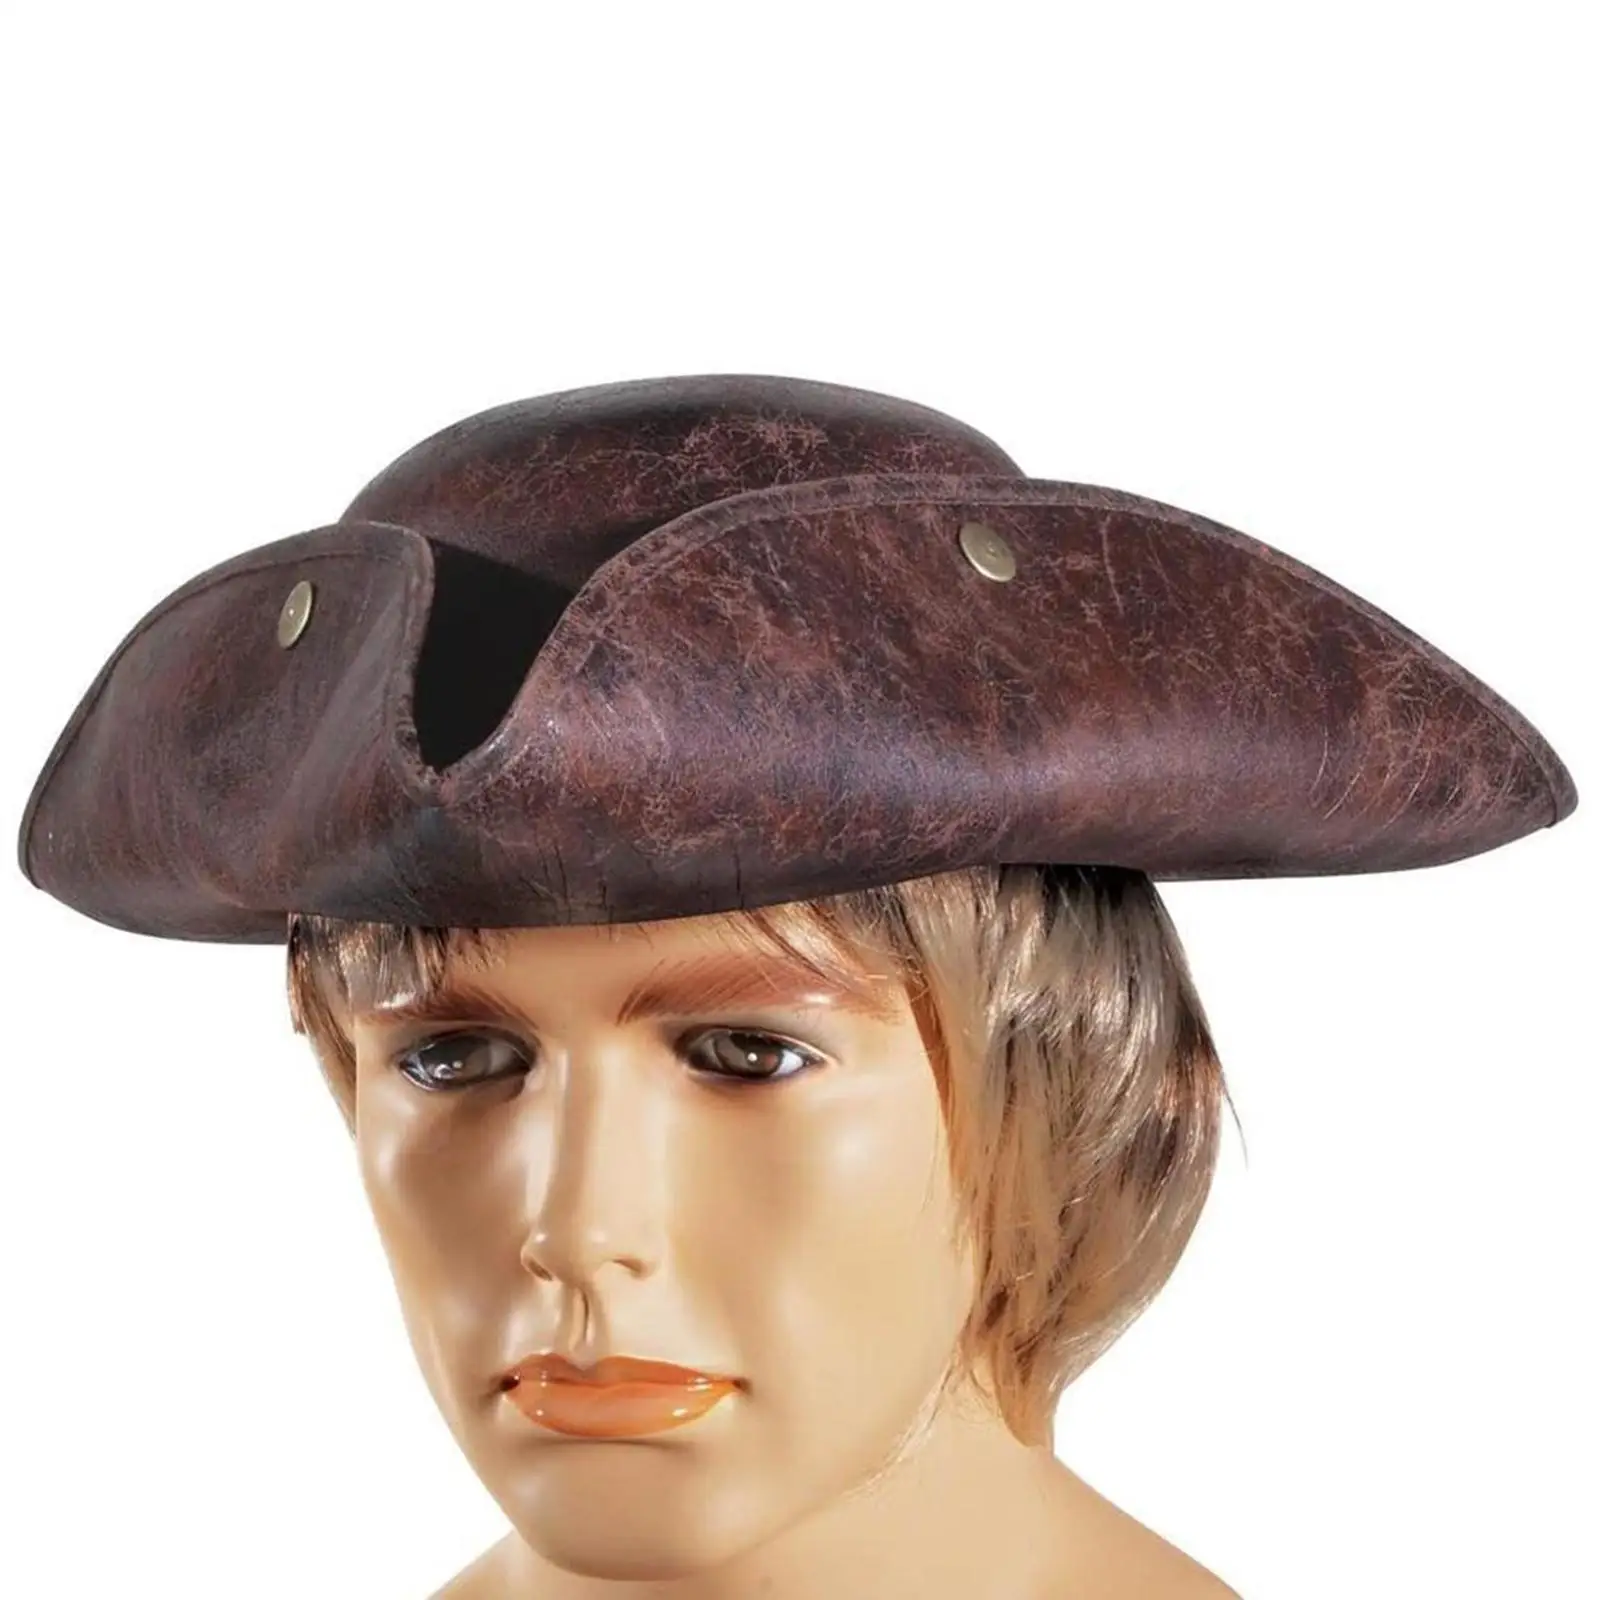 Pirate Hat Dress up Captain Costume Caps for Mardi Gras Play Games of Adventure and Mischief Fancy Dress Events Children Adults